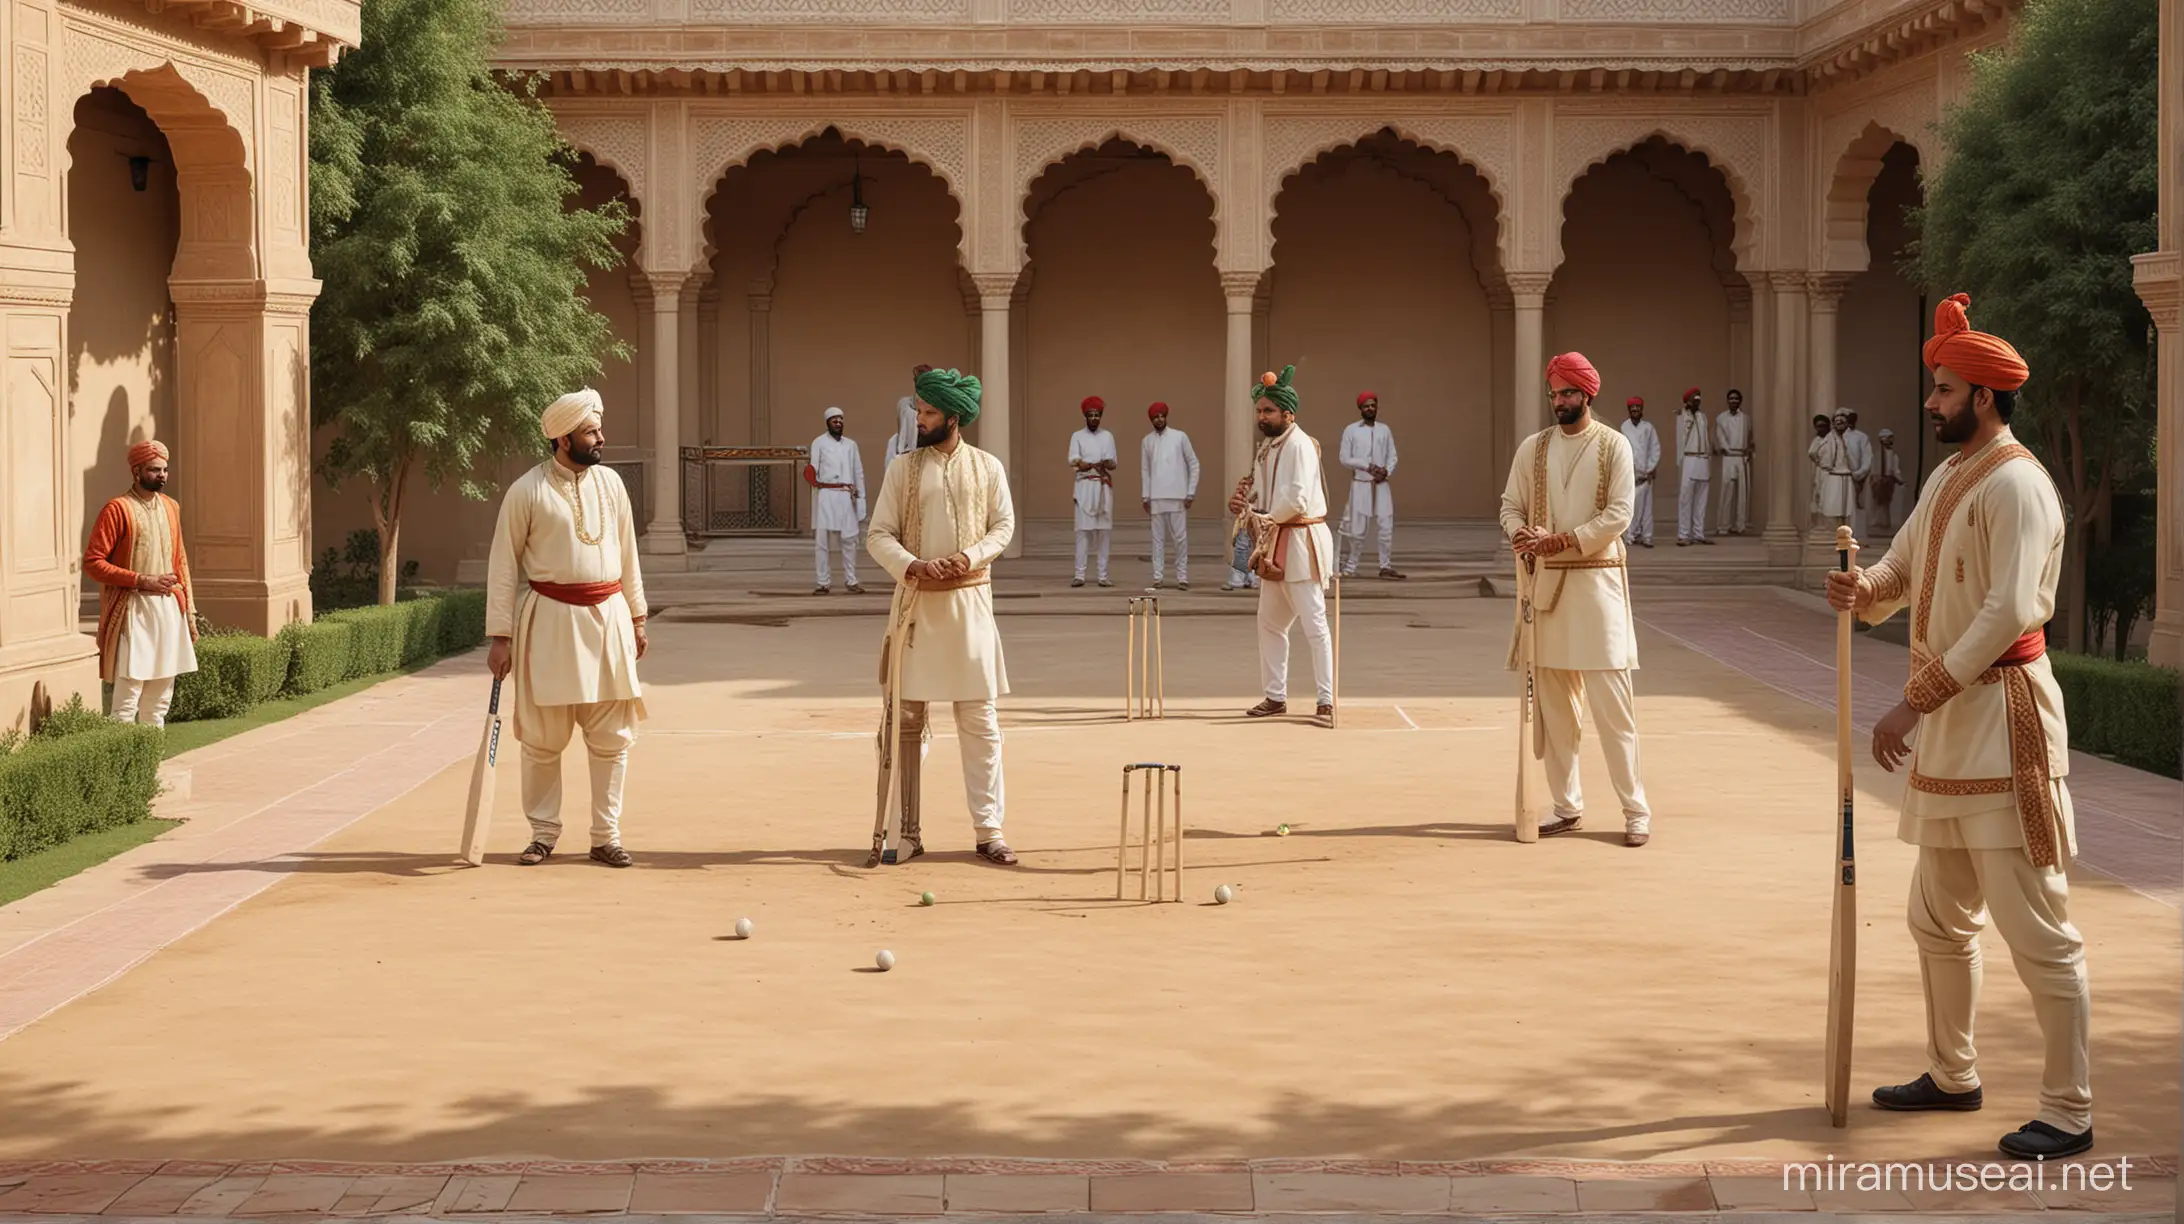 Mughal Kings Engaged in a Cricket Match Amidst Royal Gardens